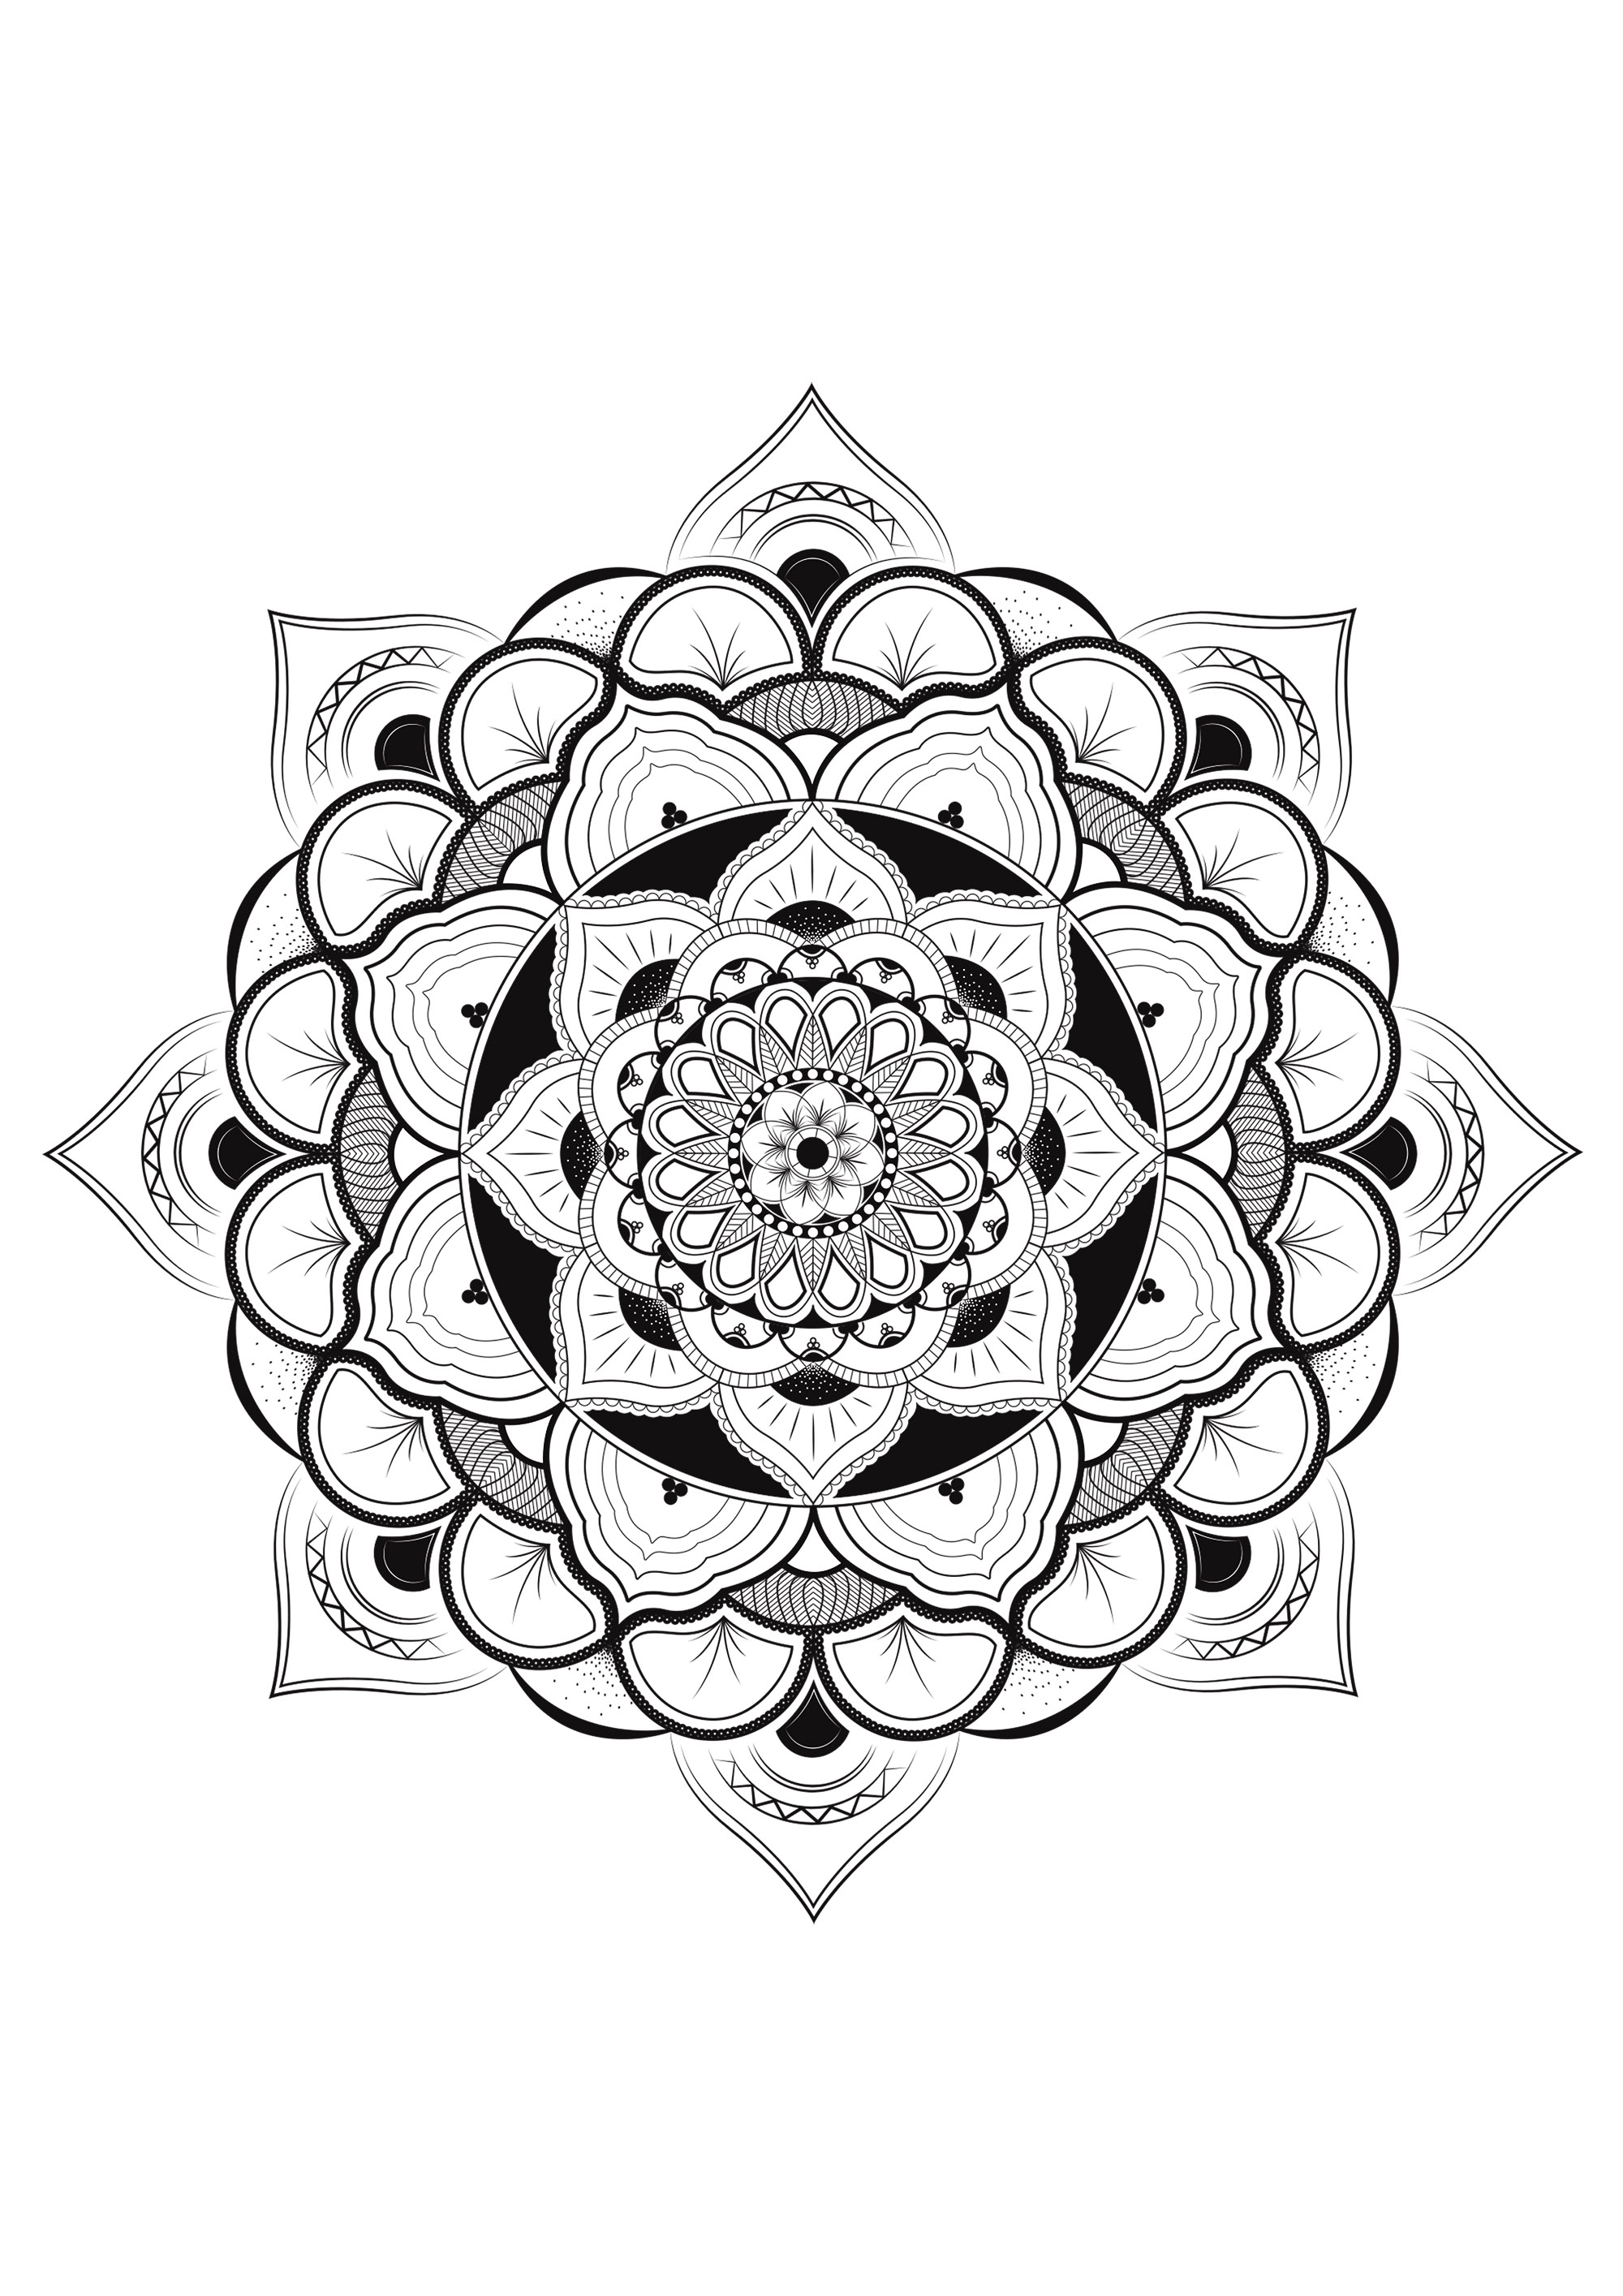 Download Flower mandala - Louise - Coloring Pages for Adults